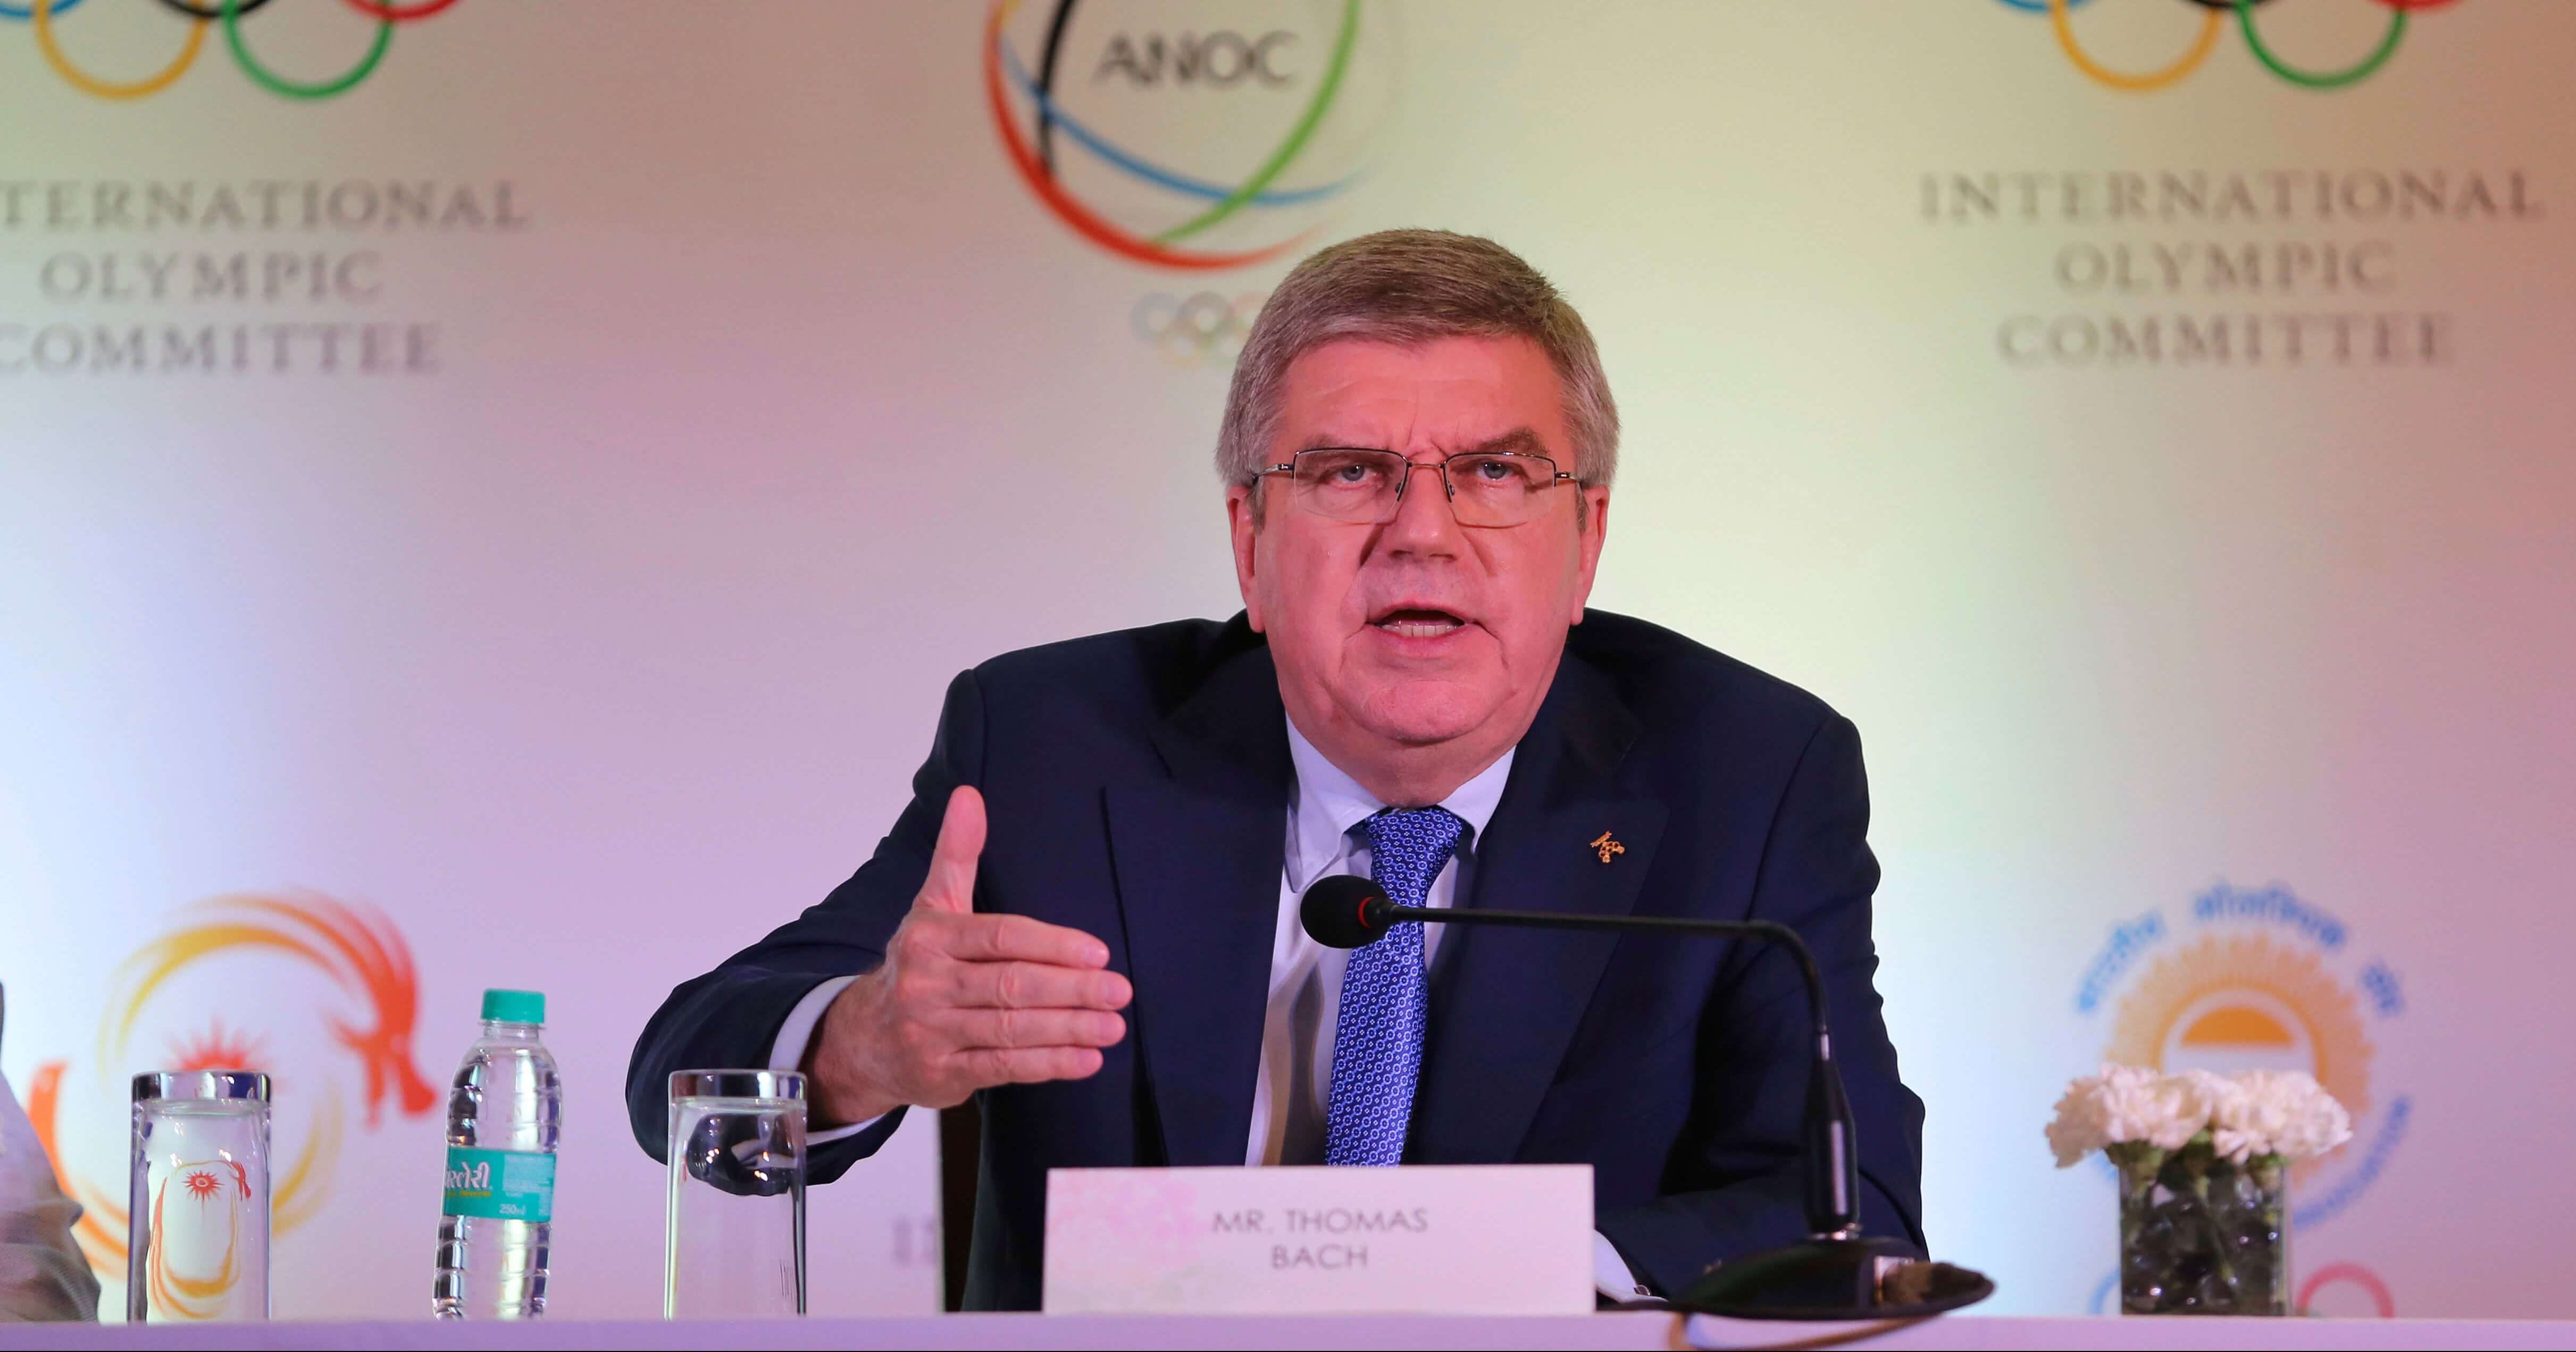 International Olympic Committee President Thomas Bach addresses a press conference April 19 in New Delhi.